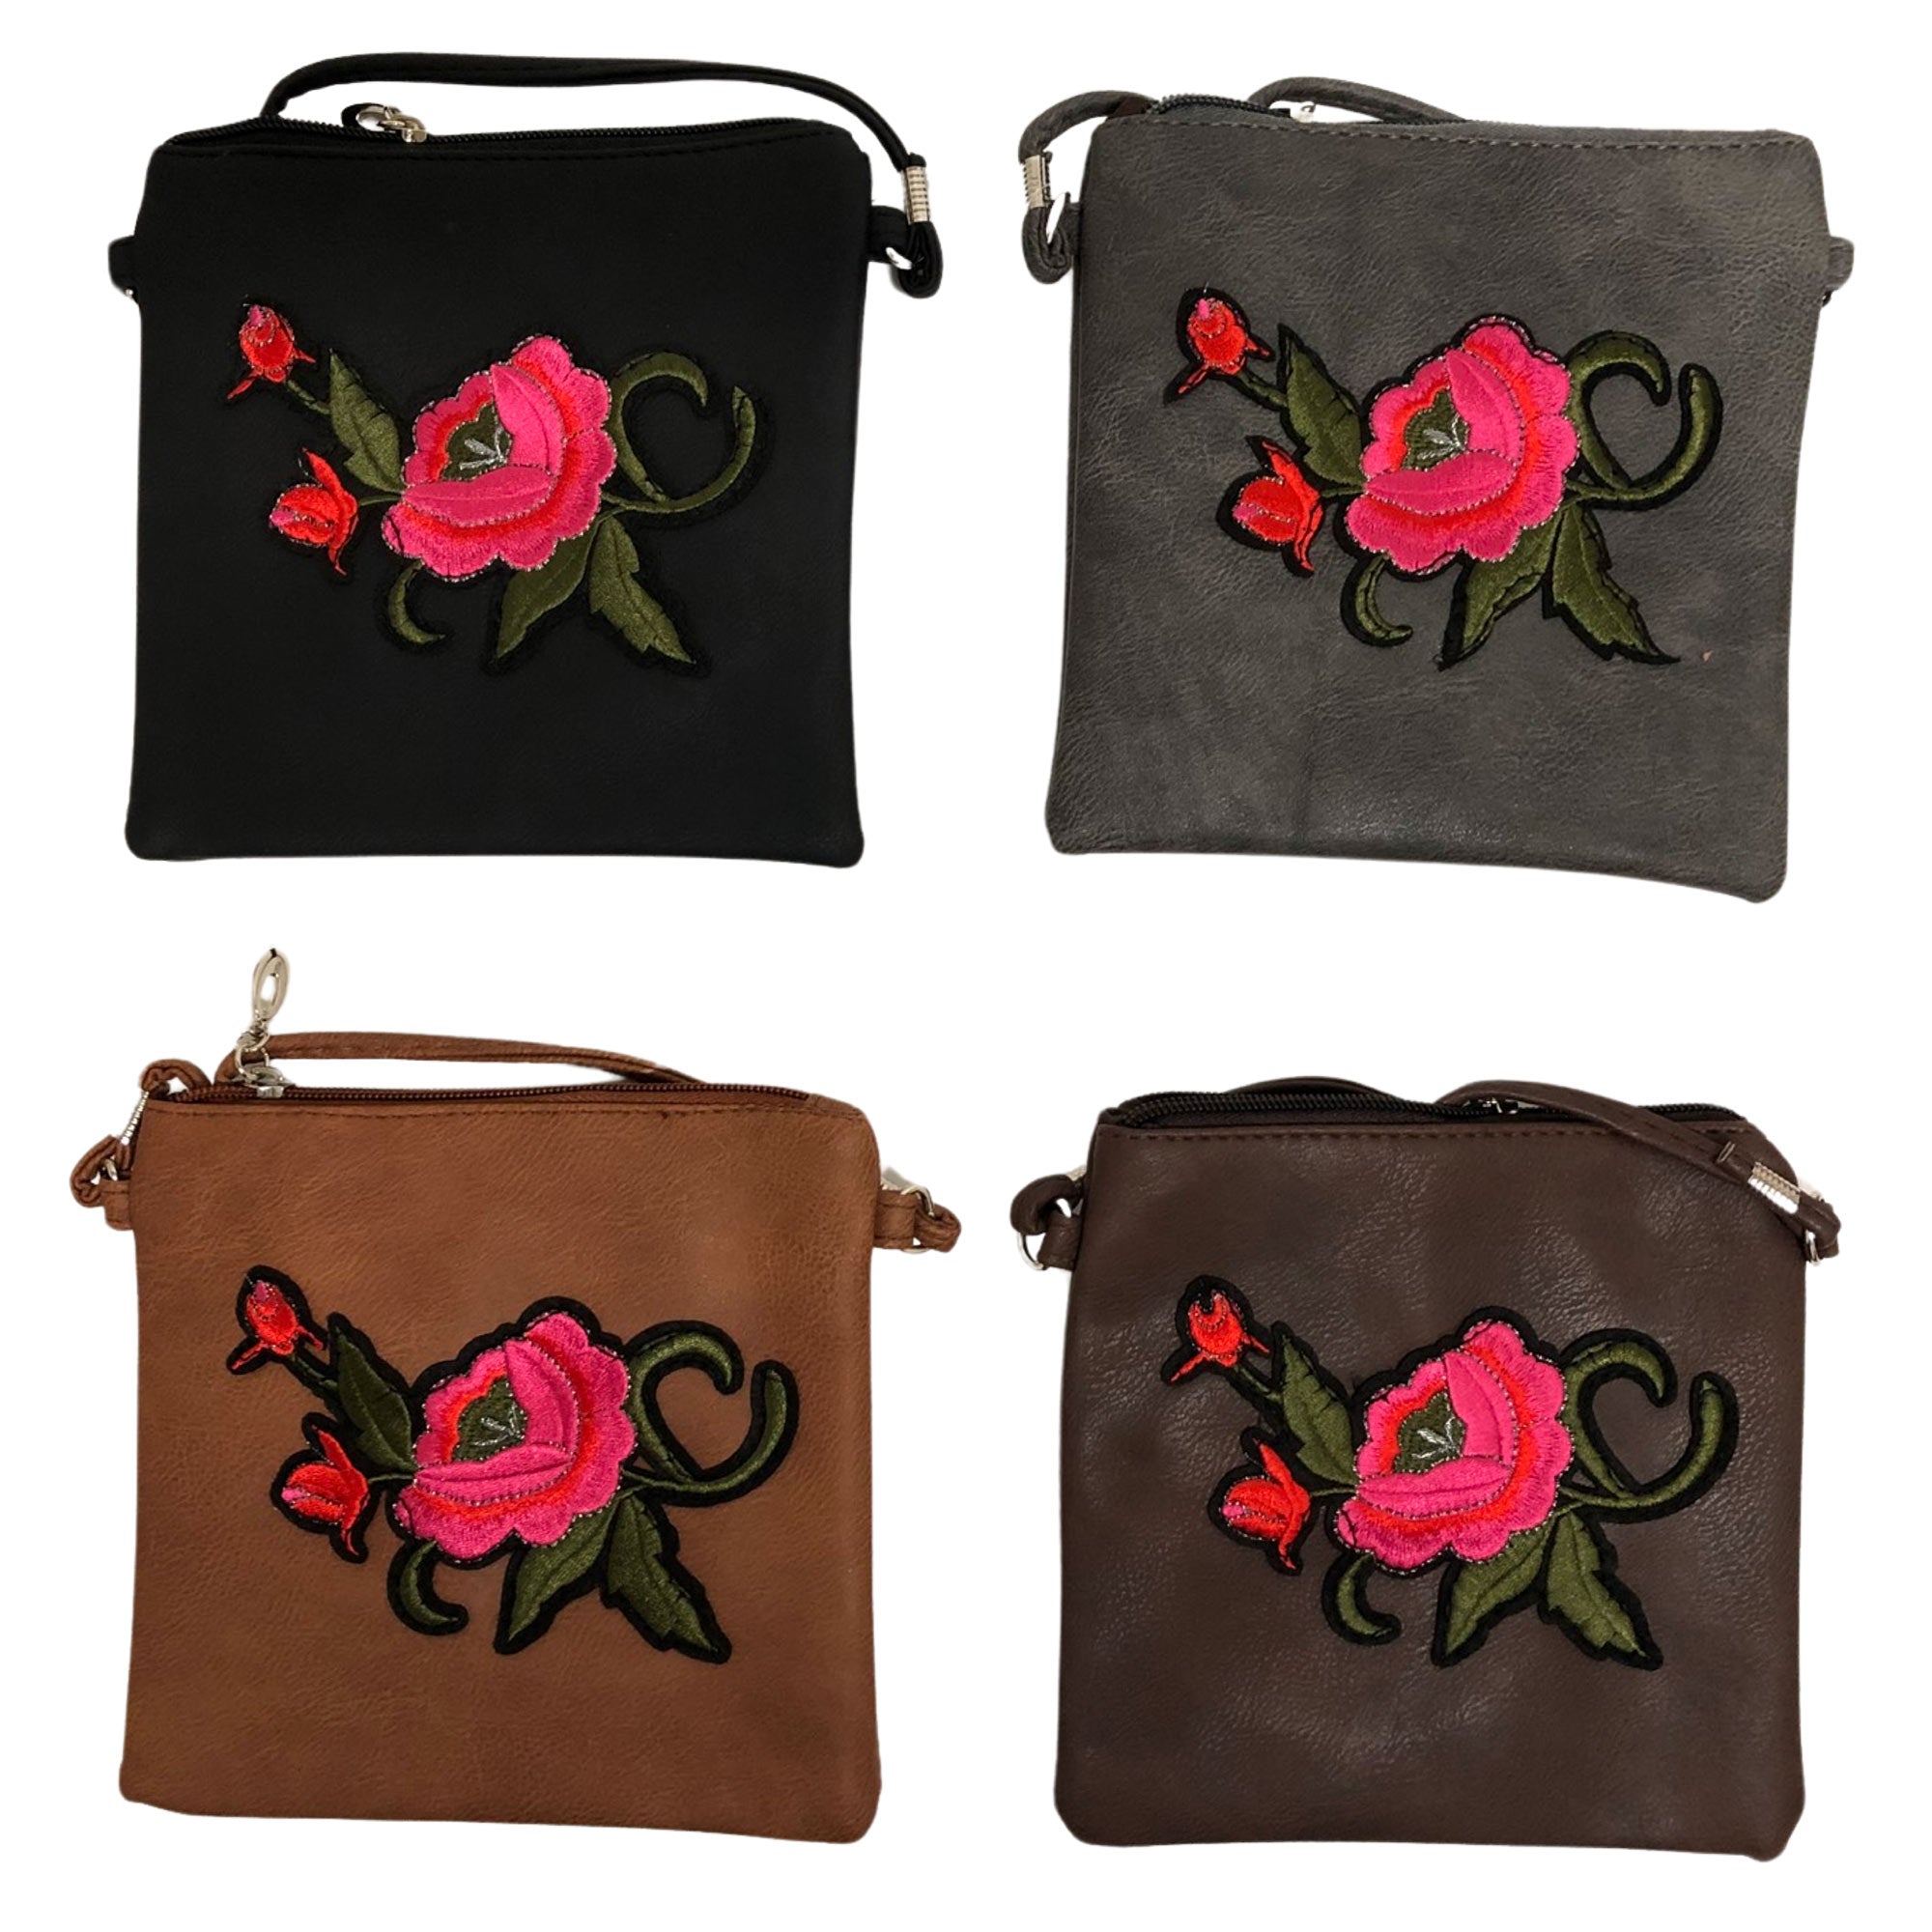 CLEARANCE WOMEN'S ROSE EMBROIDERED CROSSBODY (CASE OF 36 - $1.75 / PIECE)  Wholesale Crossbody with a Rose Embroidered Design SKU: 7304-DK-36